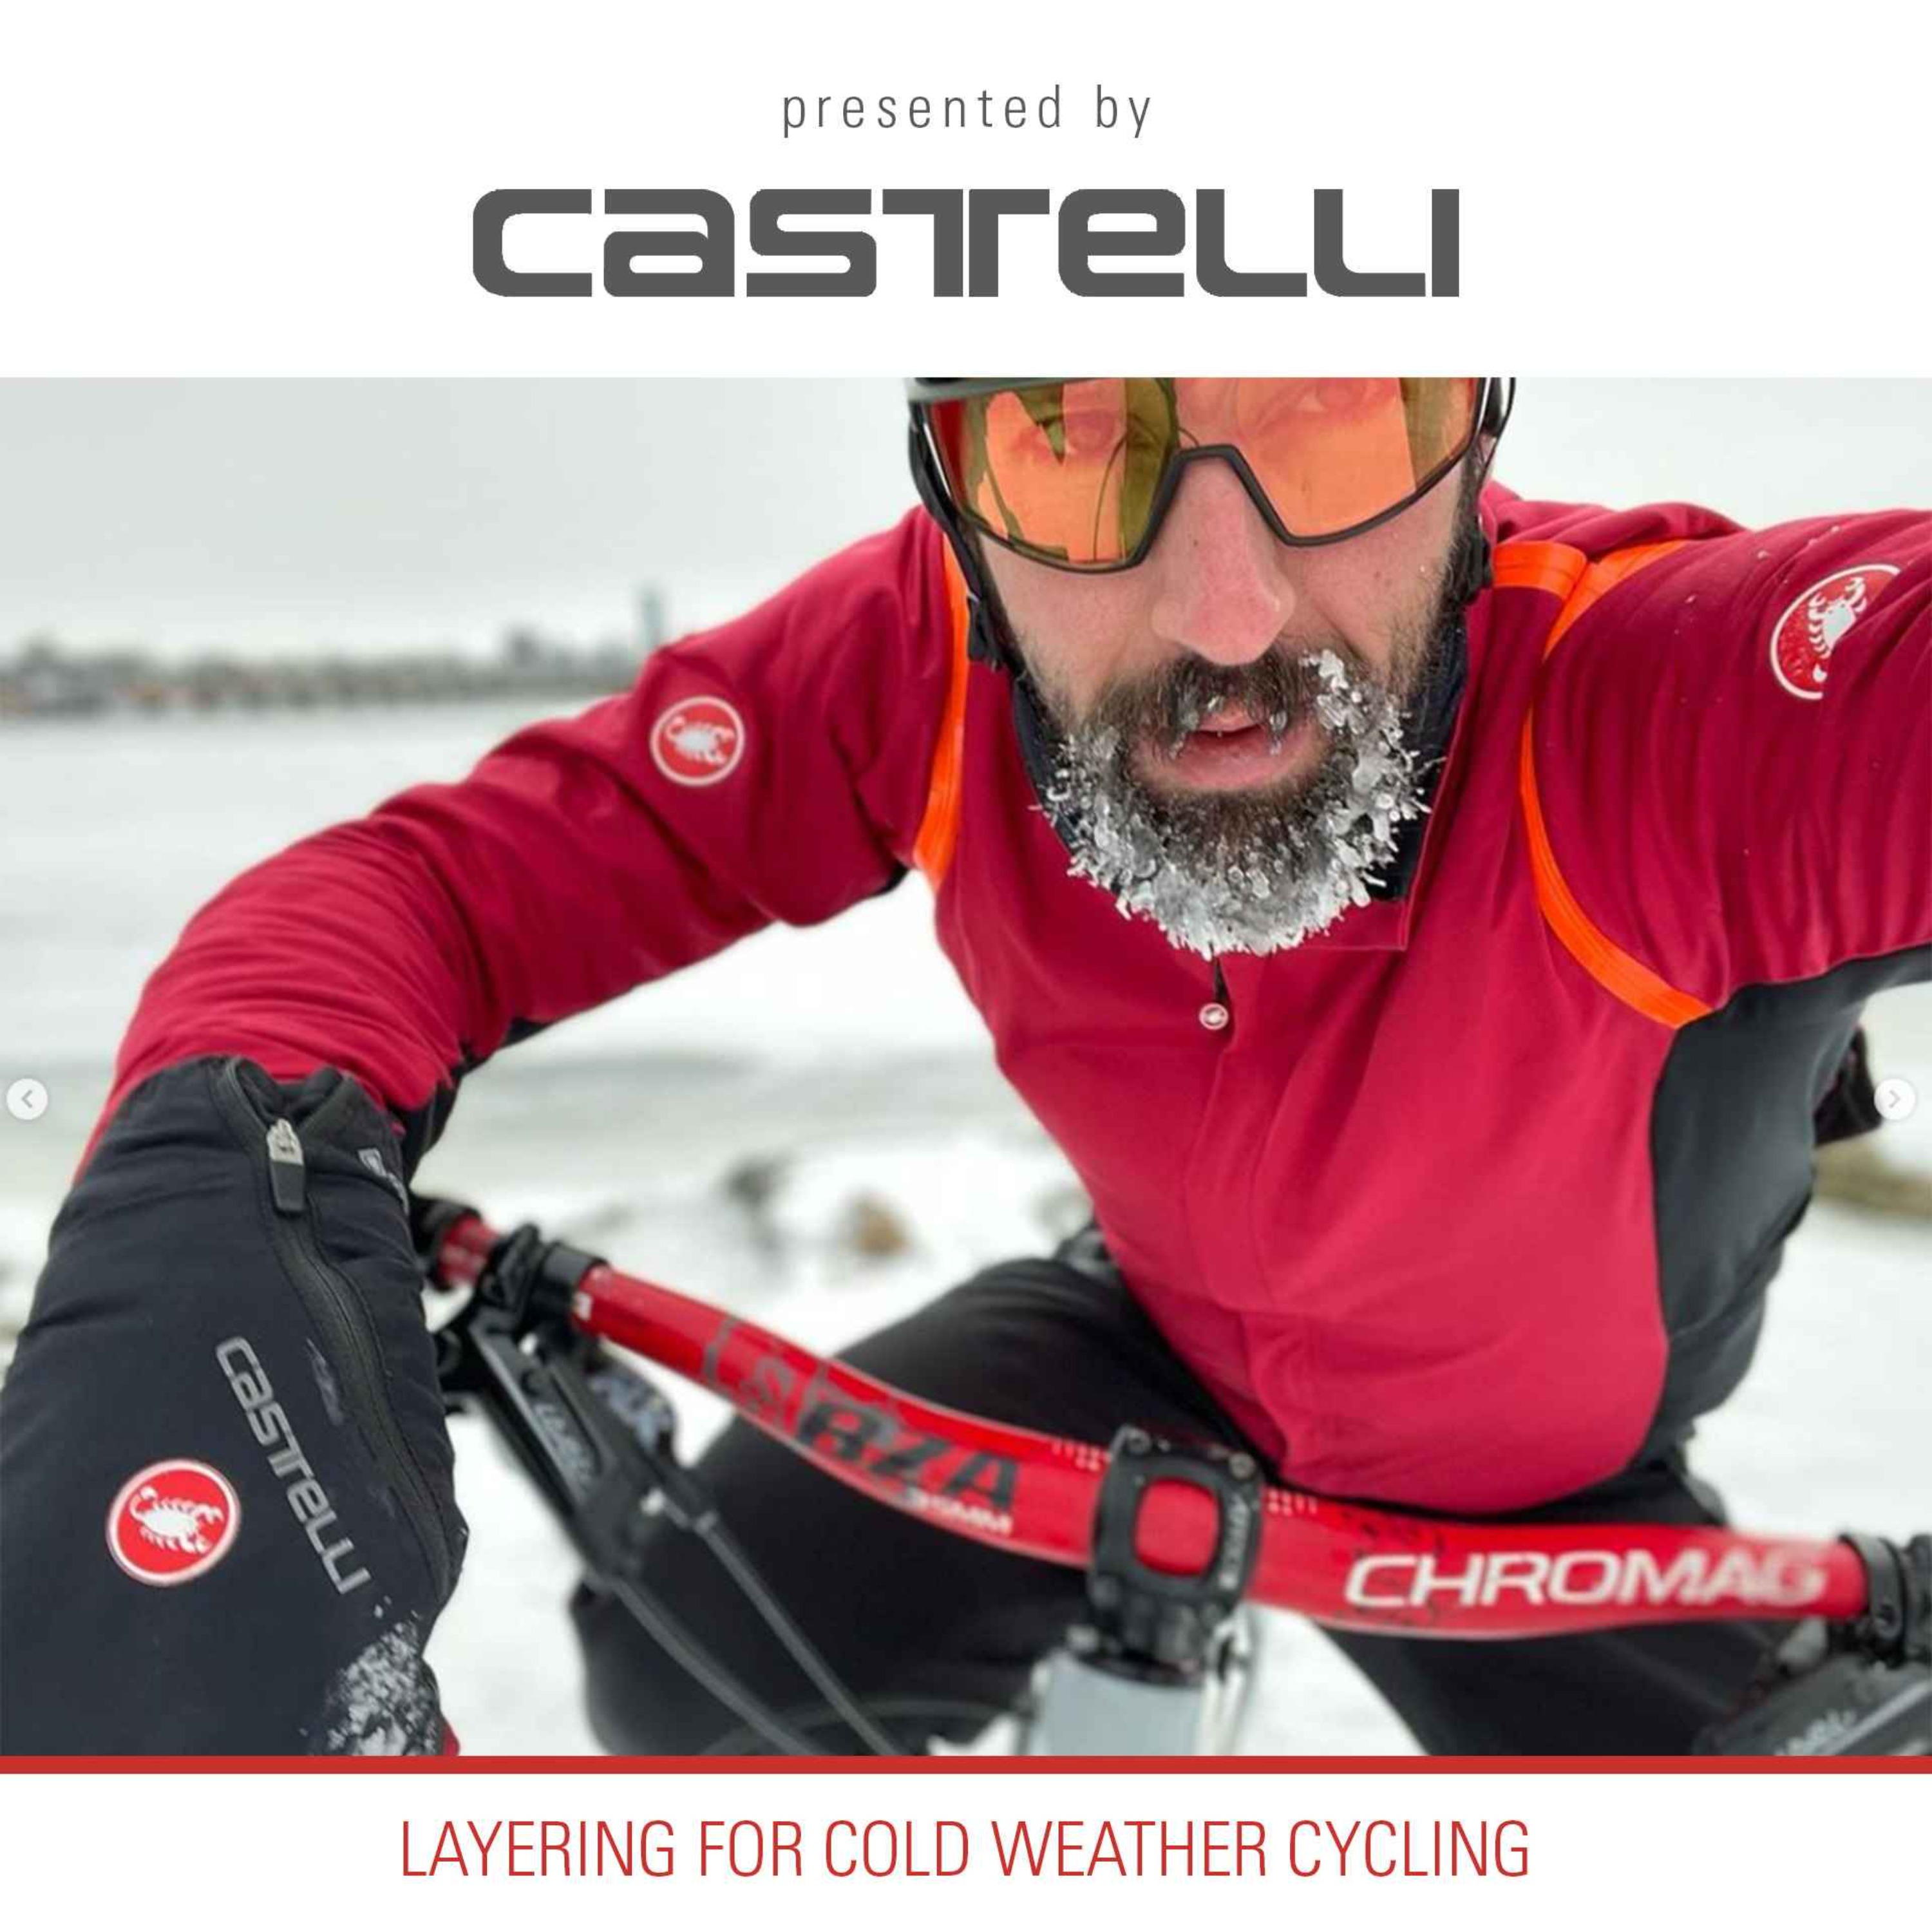 The Art of Layering for Cold Weather Cycling